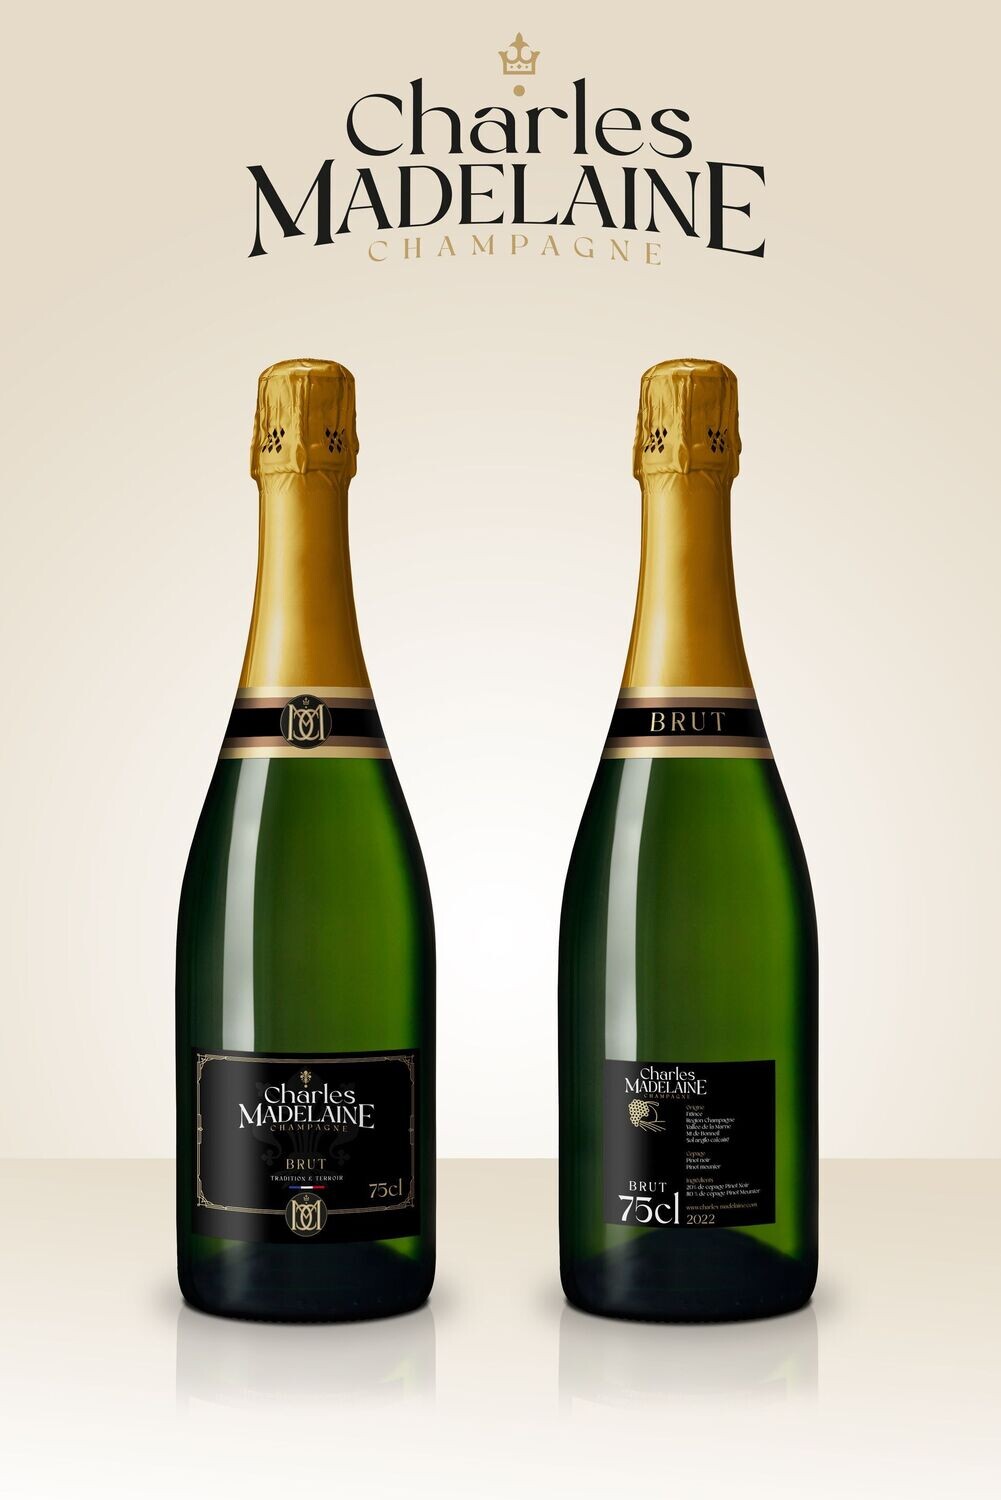 Champagne Brut Bouteille x6